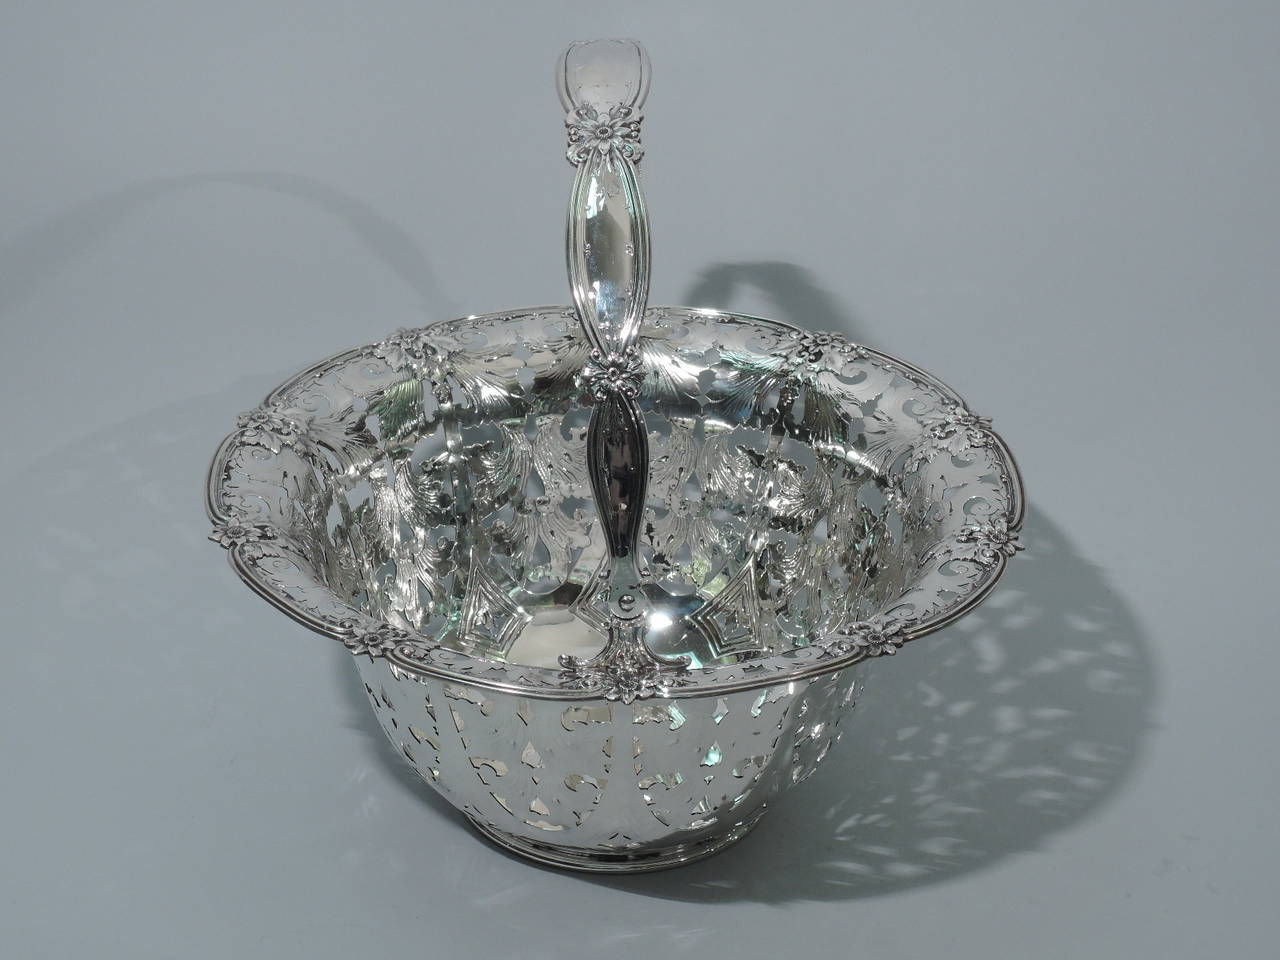 20th Century Antique Tiffany Sterling Silver Basket - Large & Heavy with Flowers